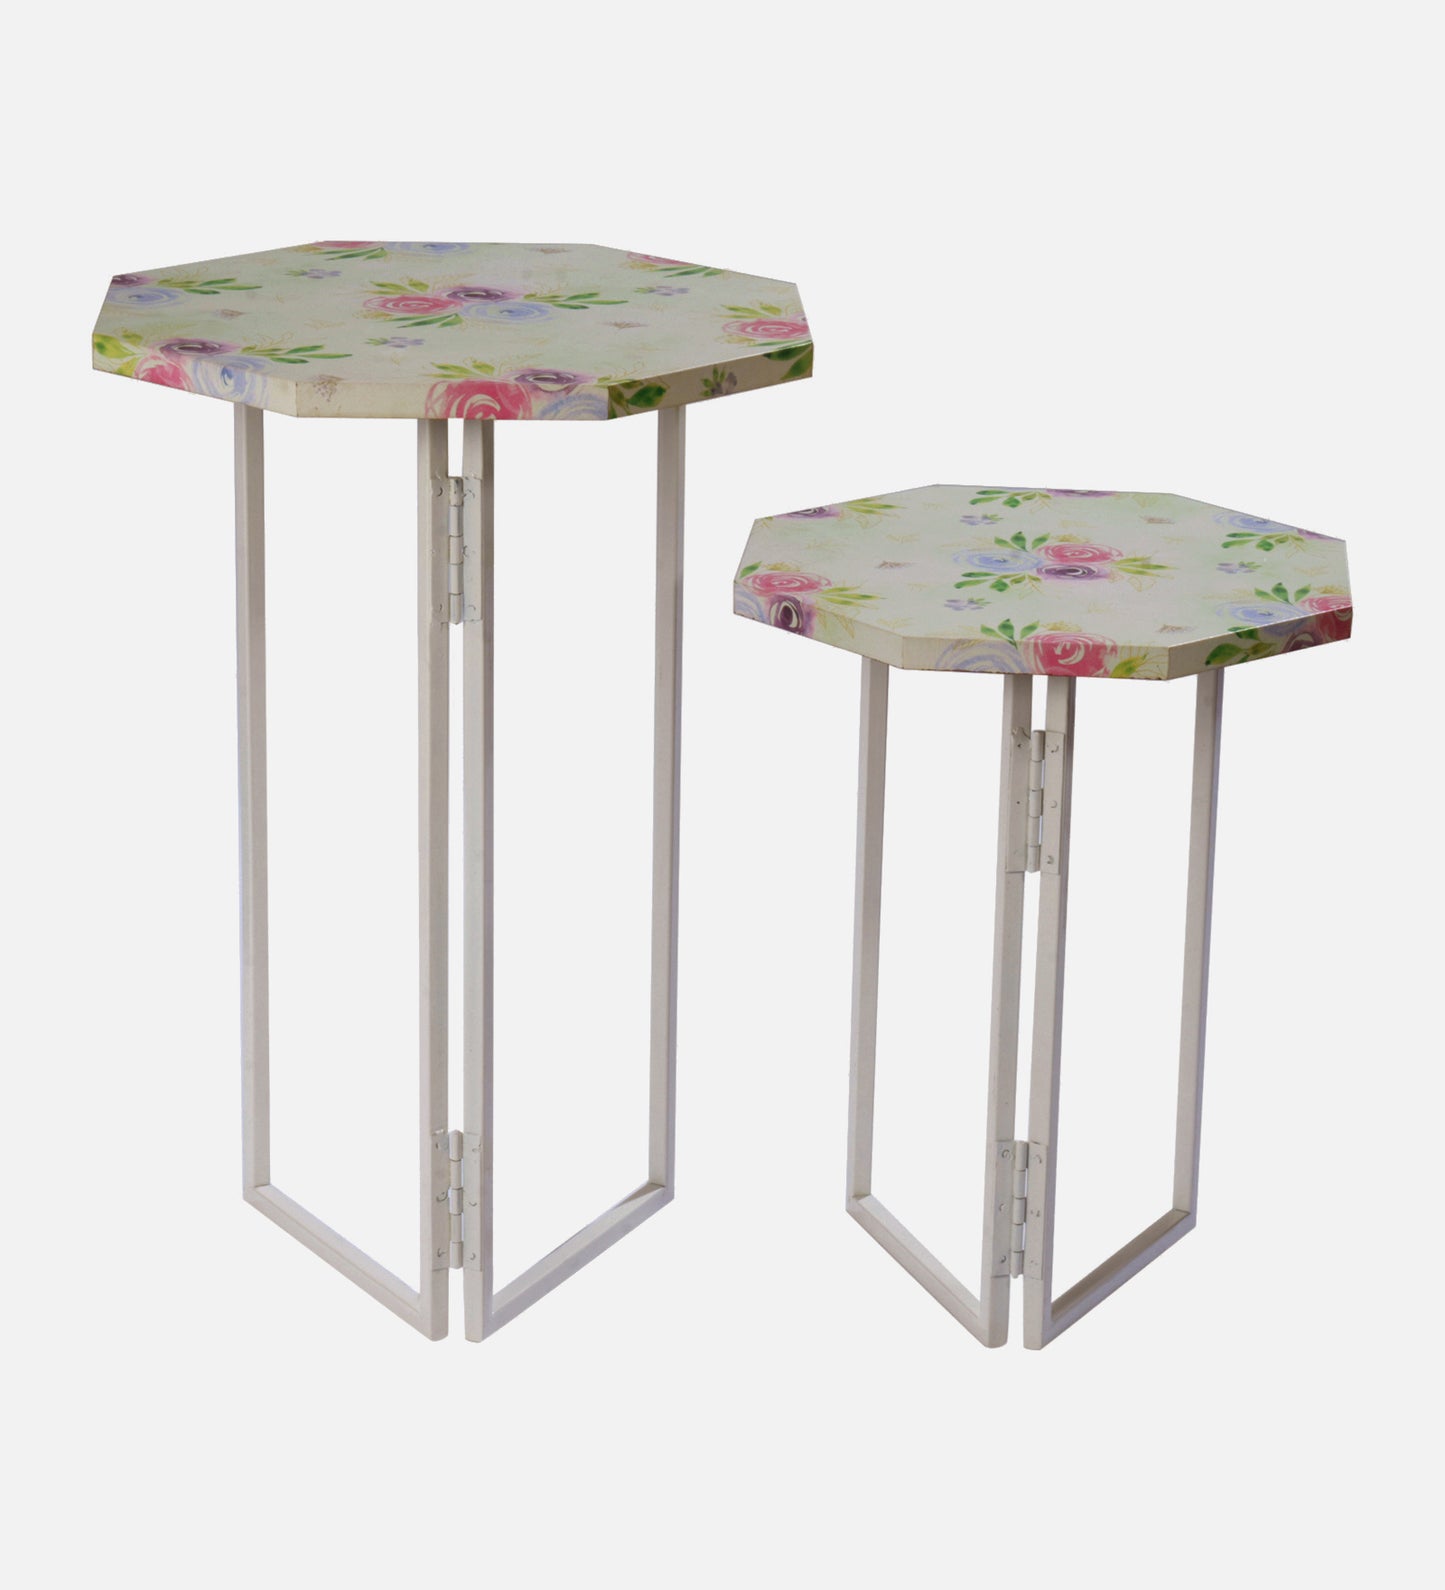 Blush Roses Octagon Oblique Nesting Tables, Side Tables, Wooden Tables, Living Room Decor by A Tiny Mistake